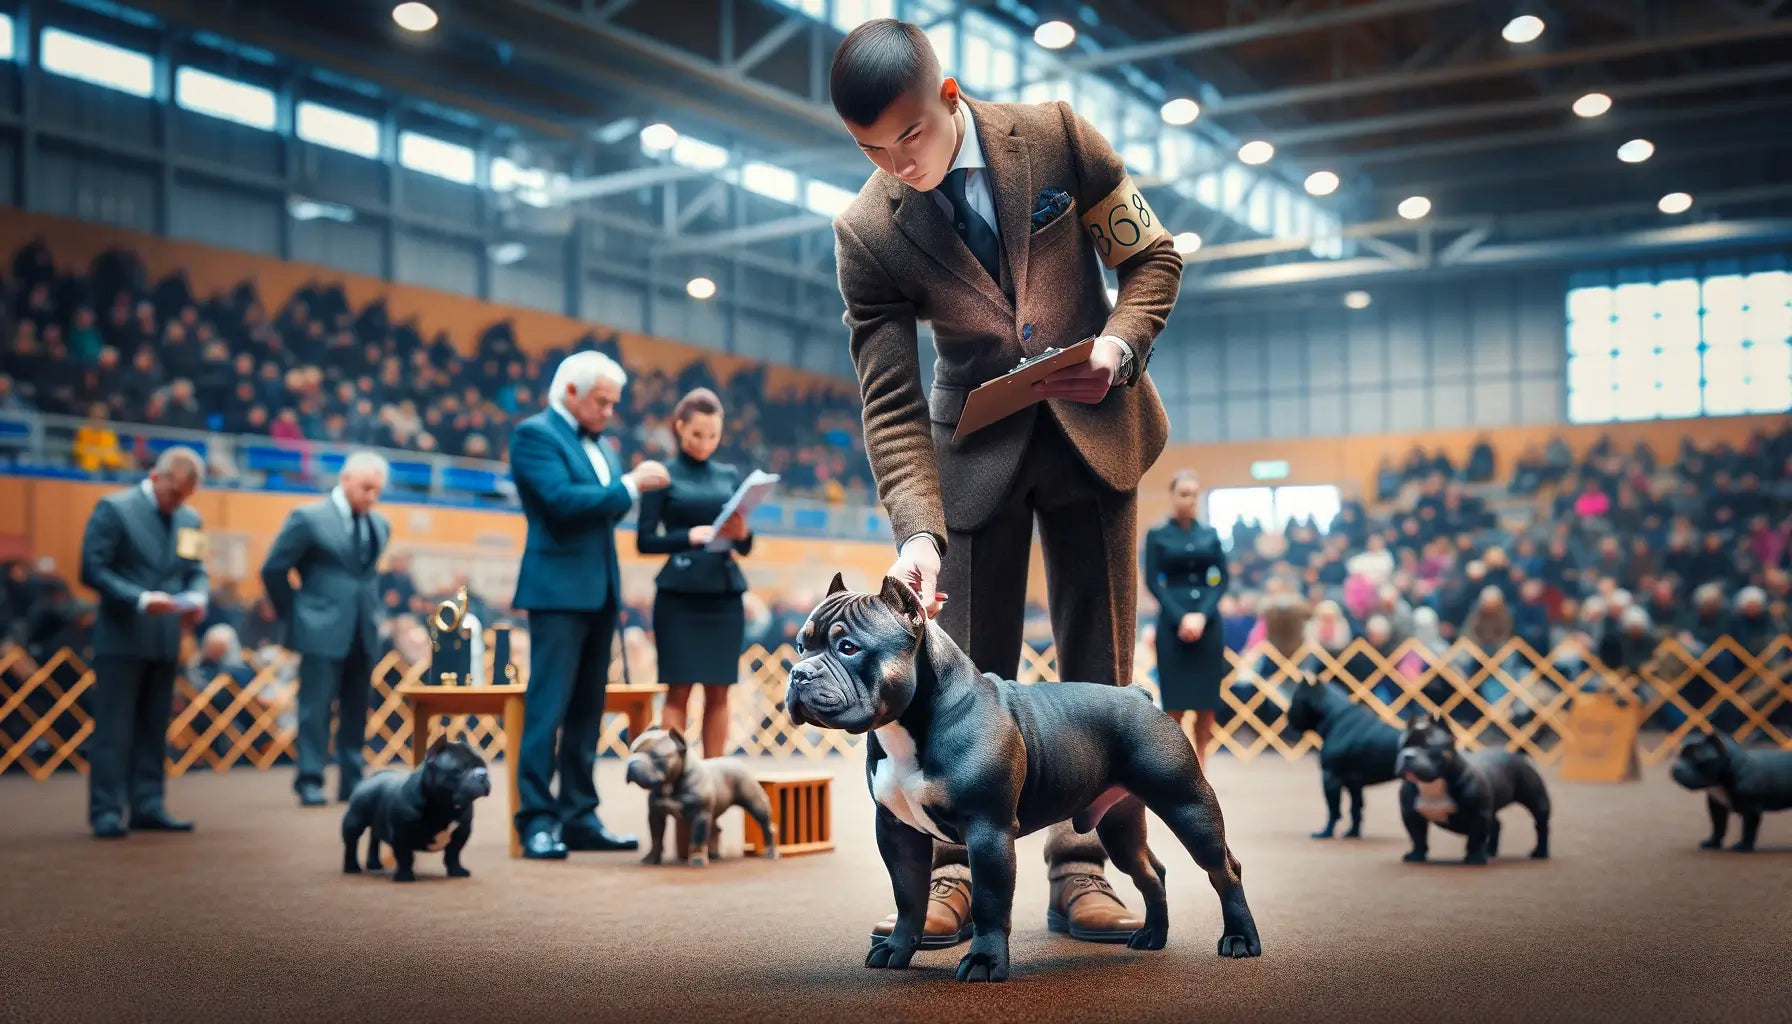 A Pocket Bully participating in a dog show, displaying its confidence and poise